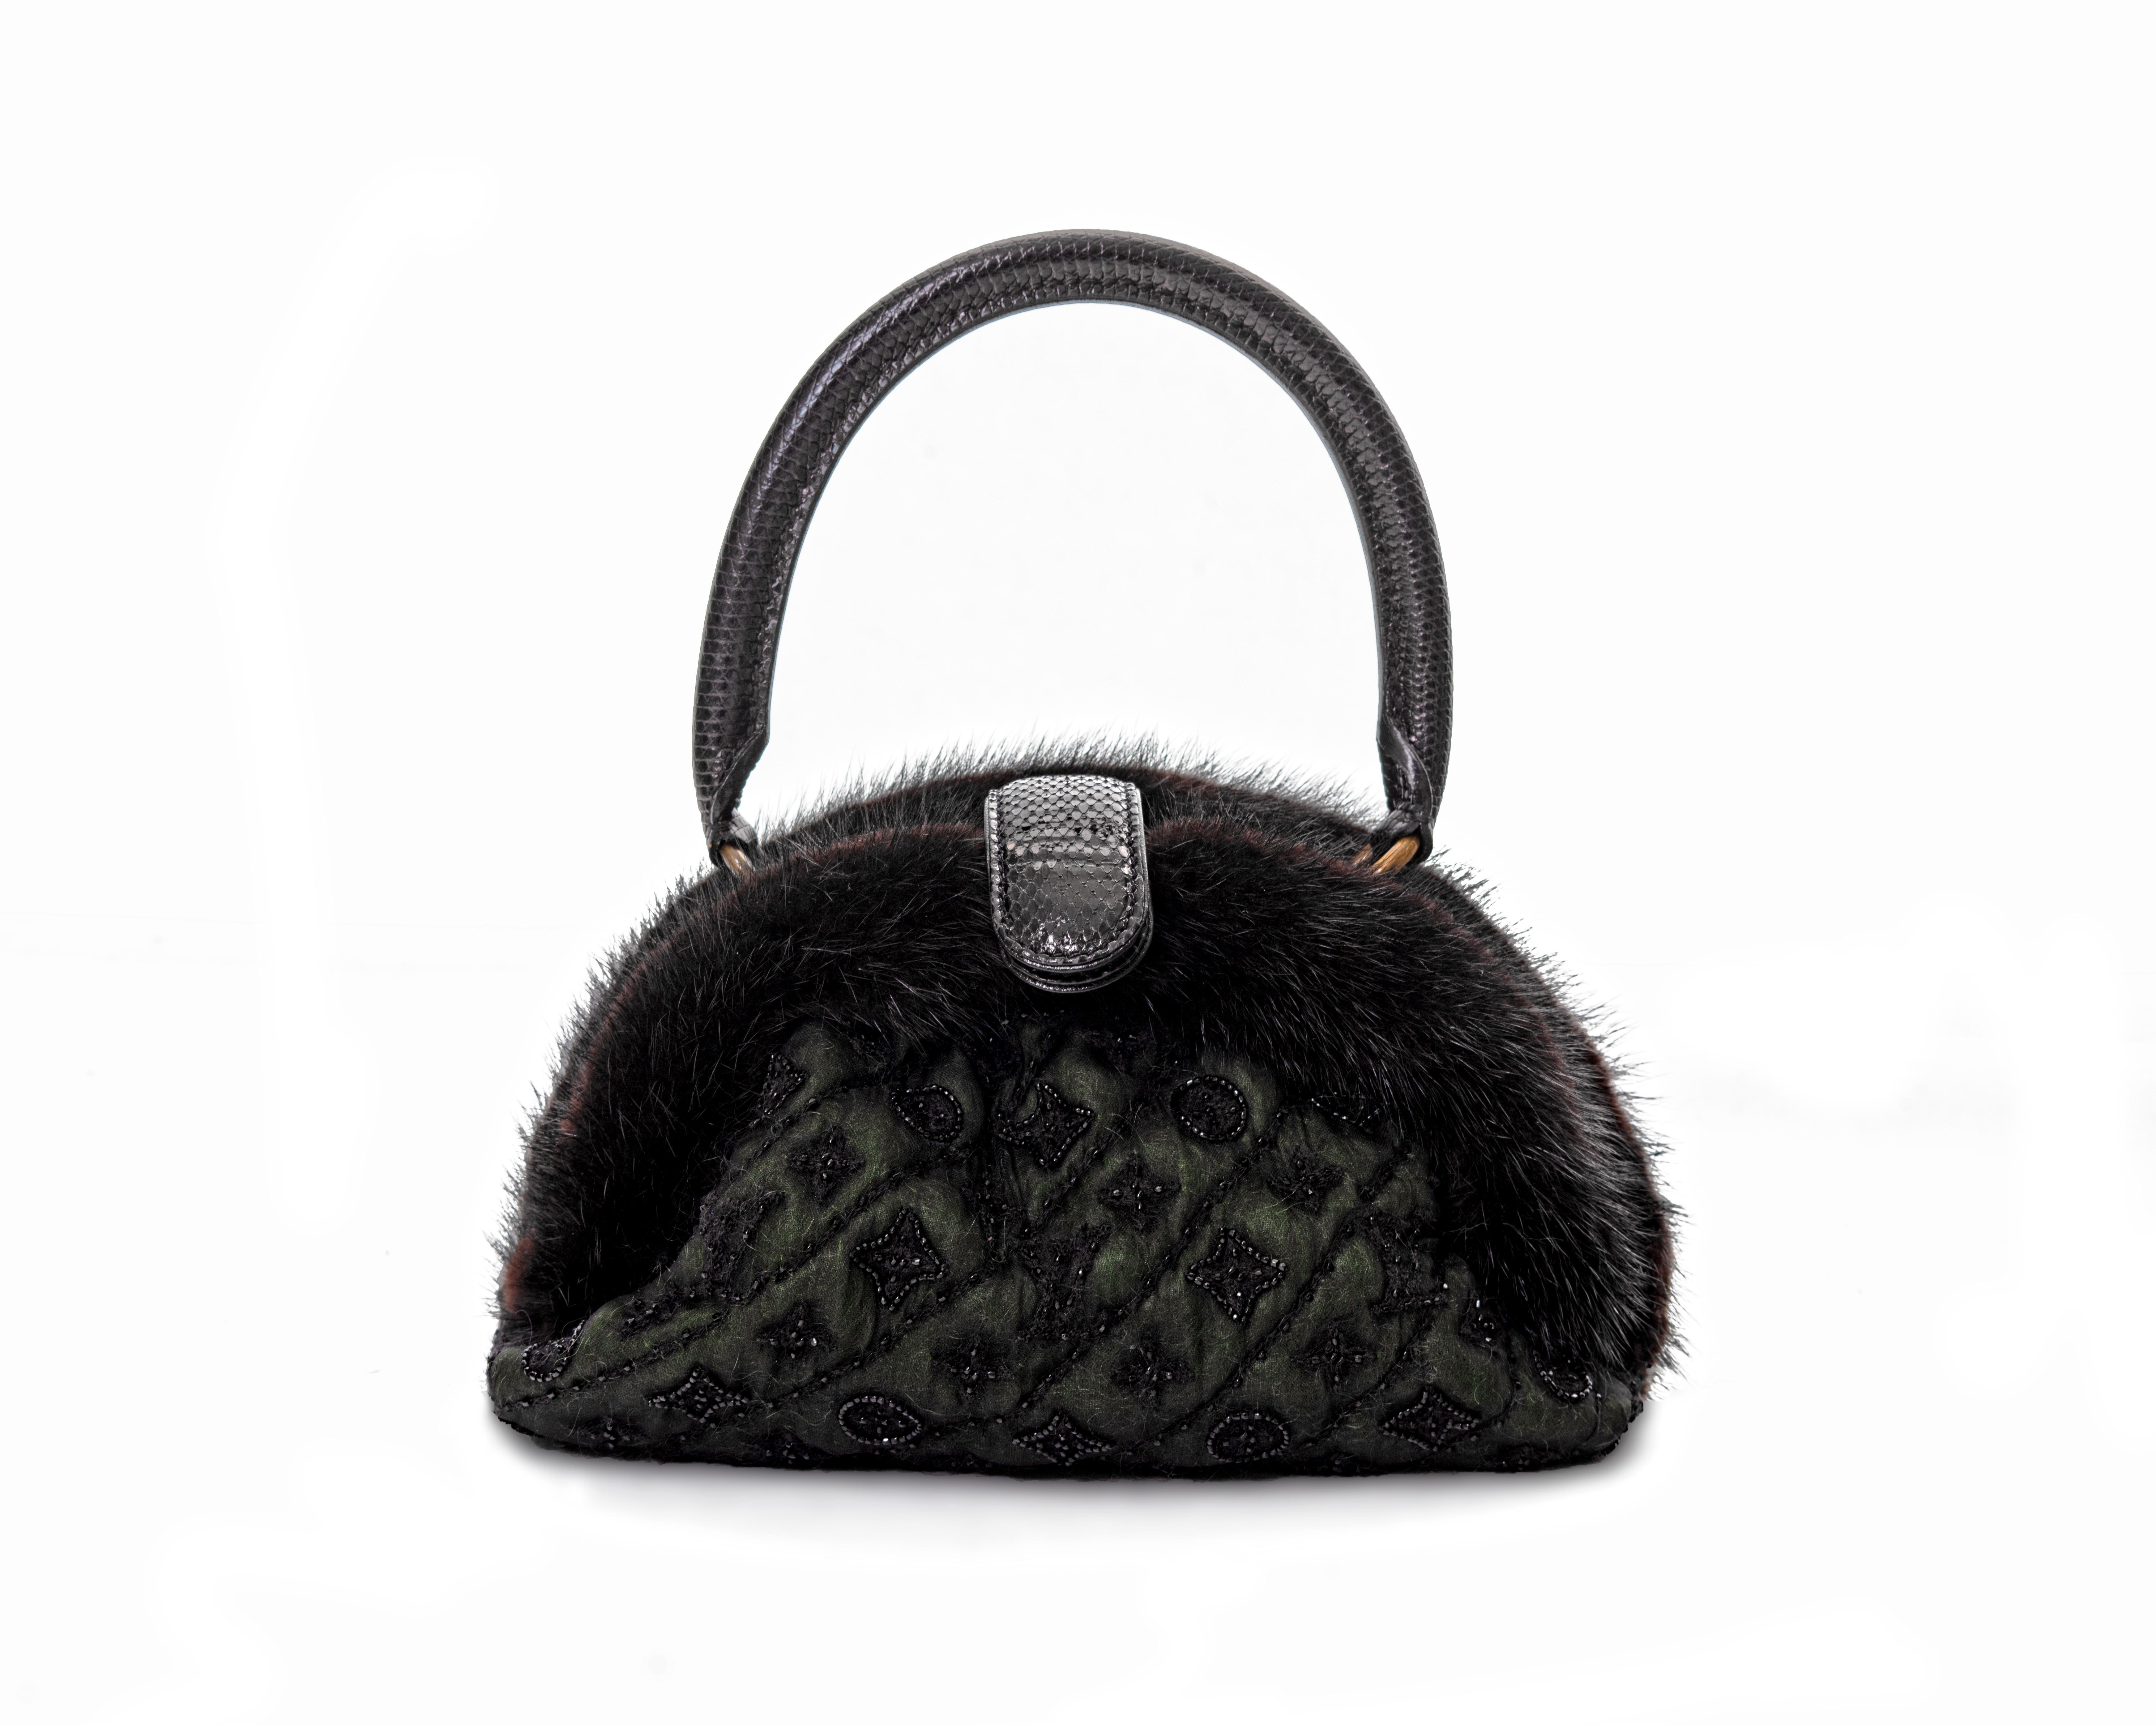 ▪ Louis Vuitton Mousseline Demi Lune Bag
▪ Creative Director: Marc Jacobs
▪ Fall-Winter 2005
▪ Limited Edition 
▪ Constructed from a dark green mohair with a silk muslin overlay 
▪ The House’s signature Monogram and quilting is intricately hand